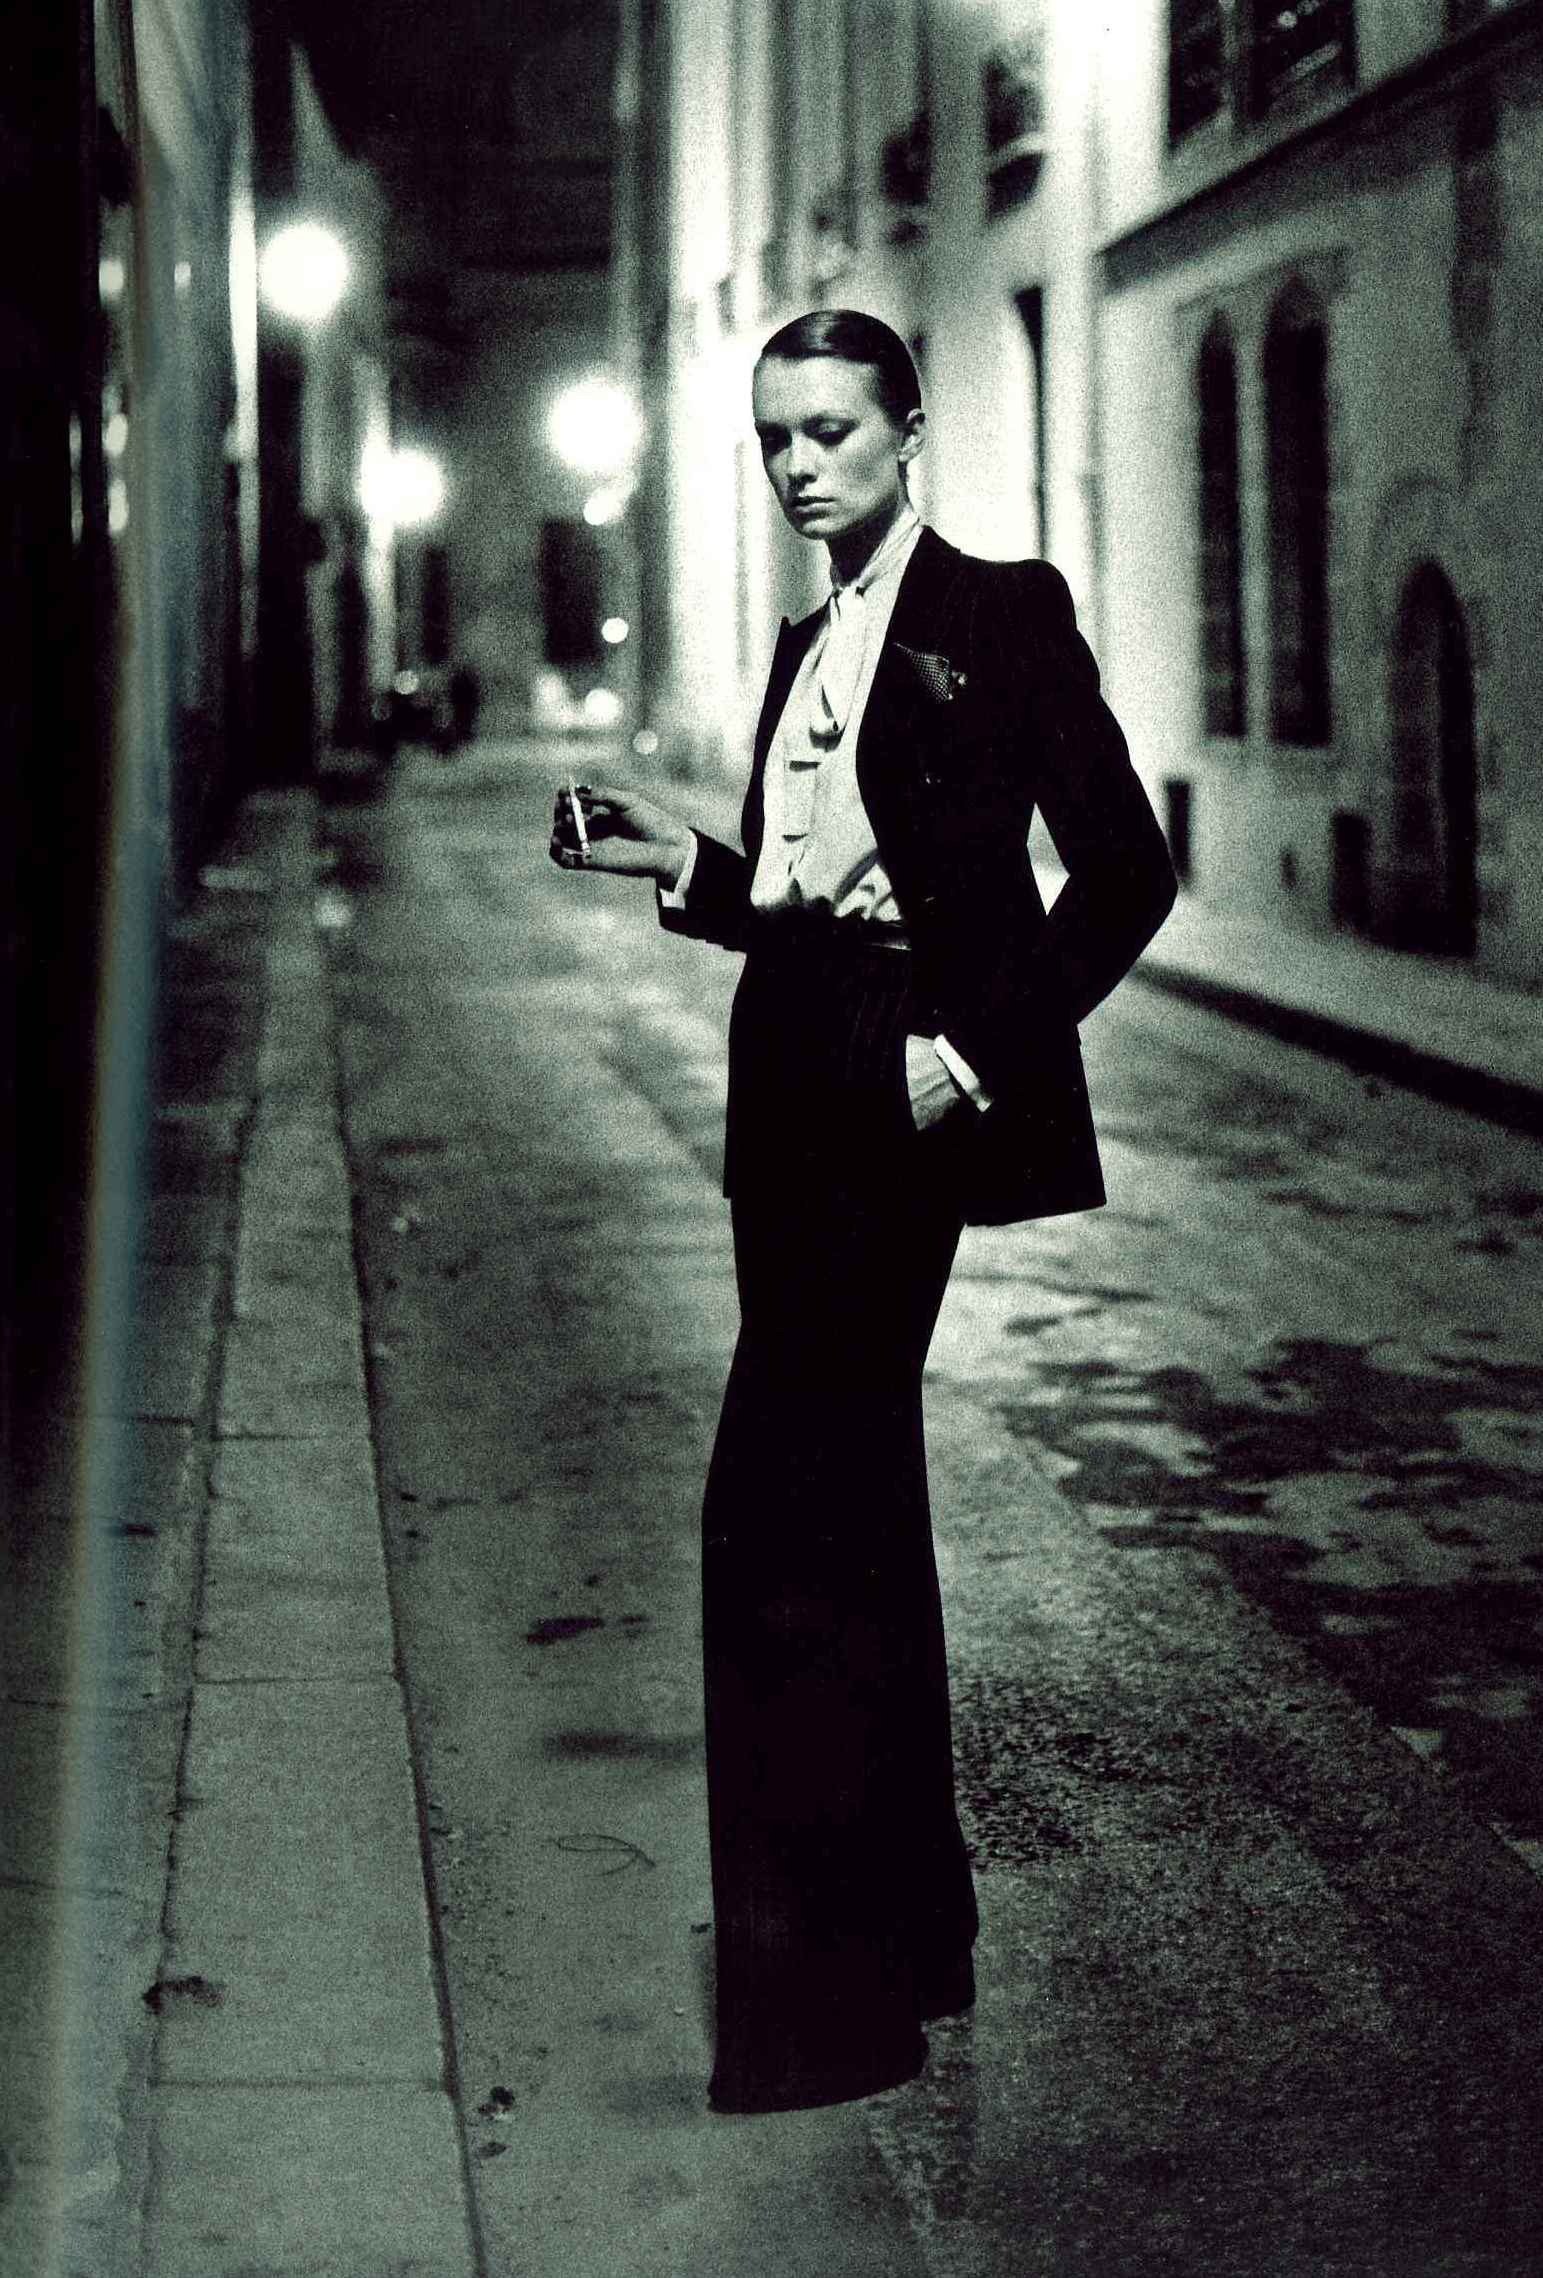 Yves Saint Laurent’s Le Smoking, one of the most famous of all women’s designs, was inspired by the men’s tuxedo. Photo: Handout